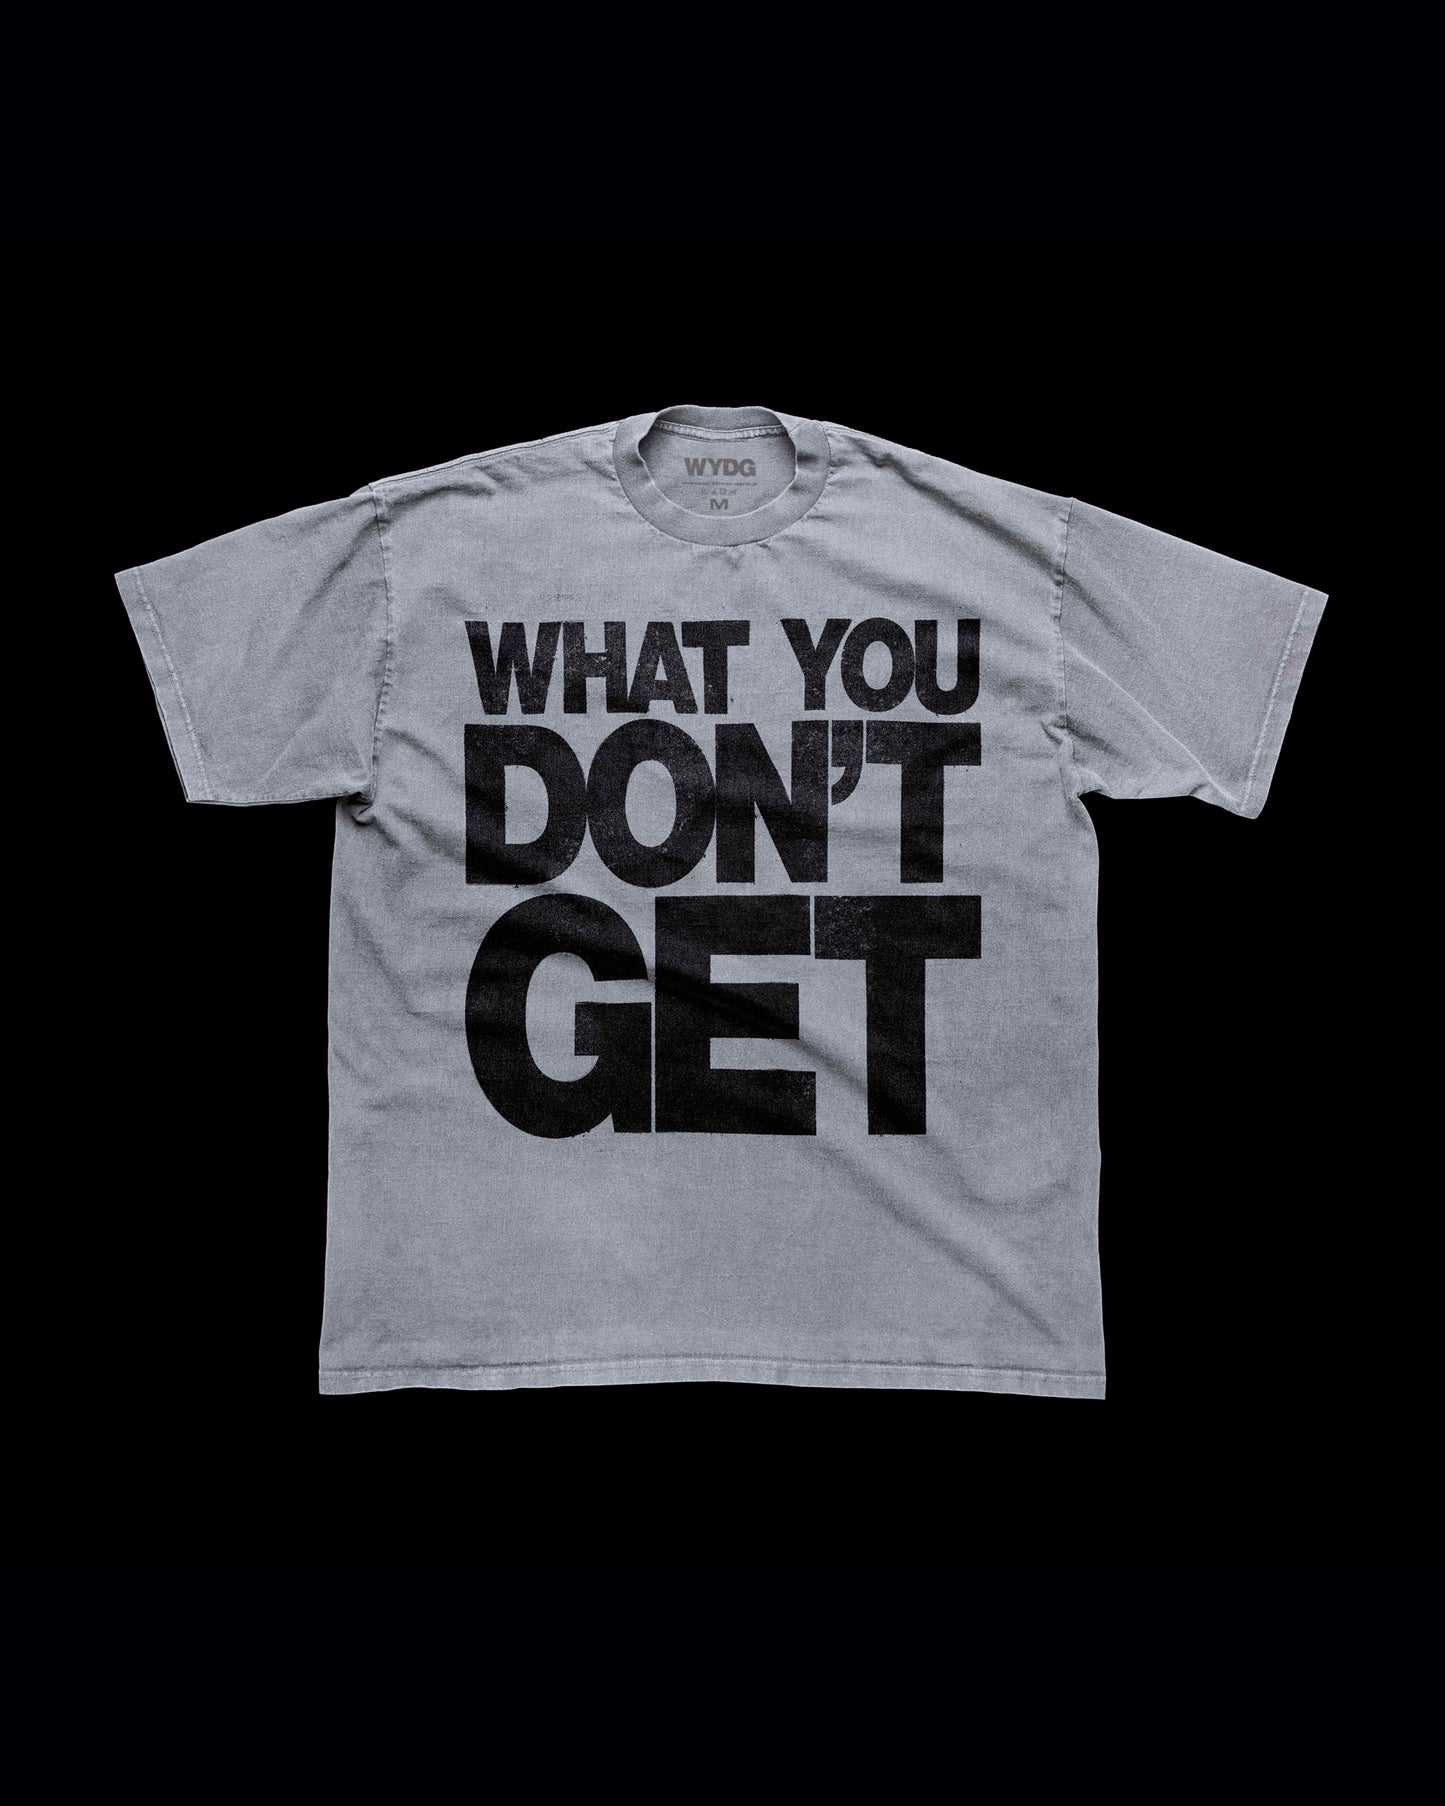 What You Don't Get (Gray Shirt)